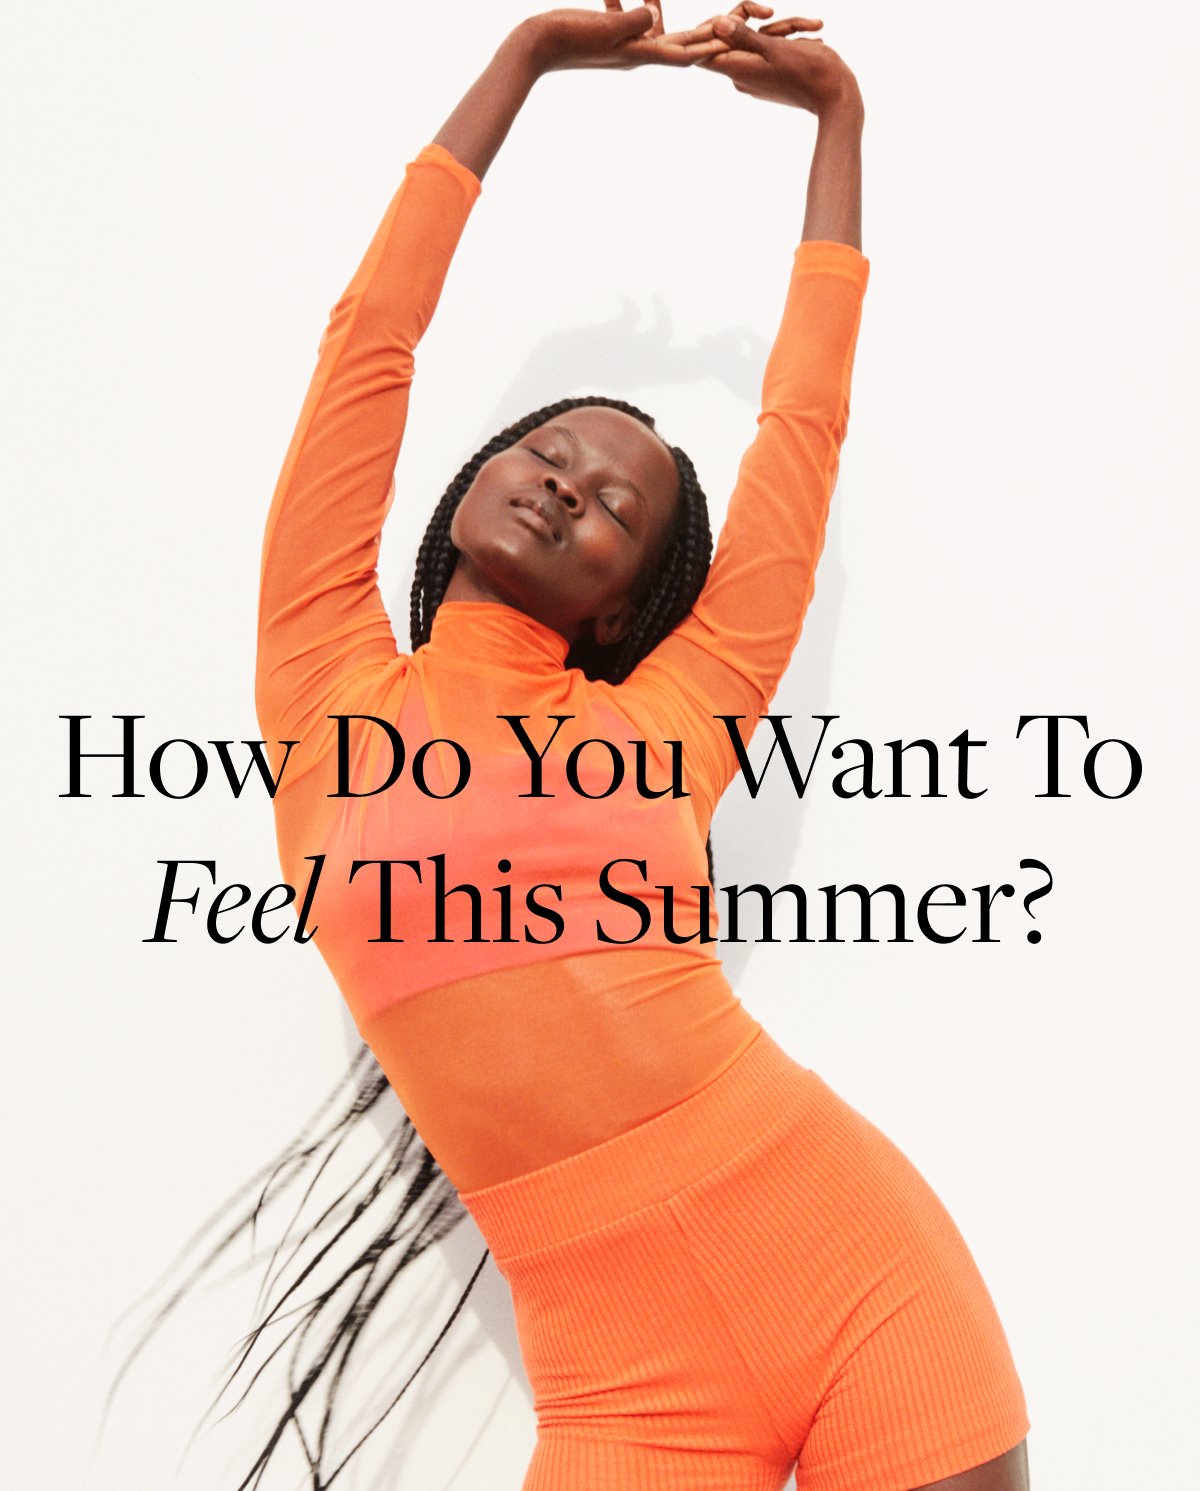 How do you want to feel this summer?